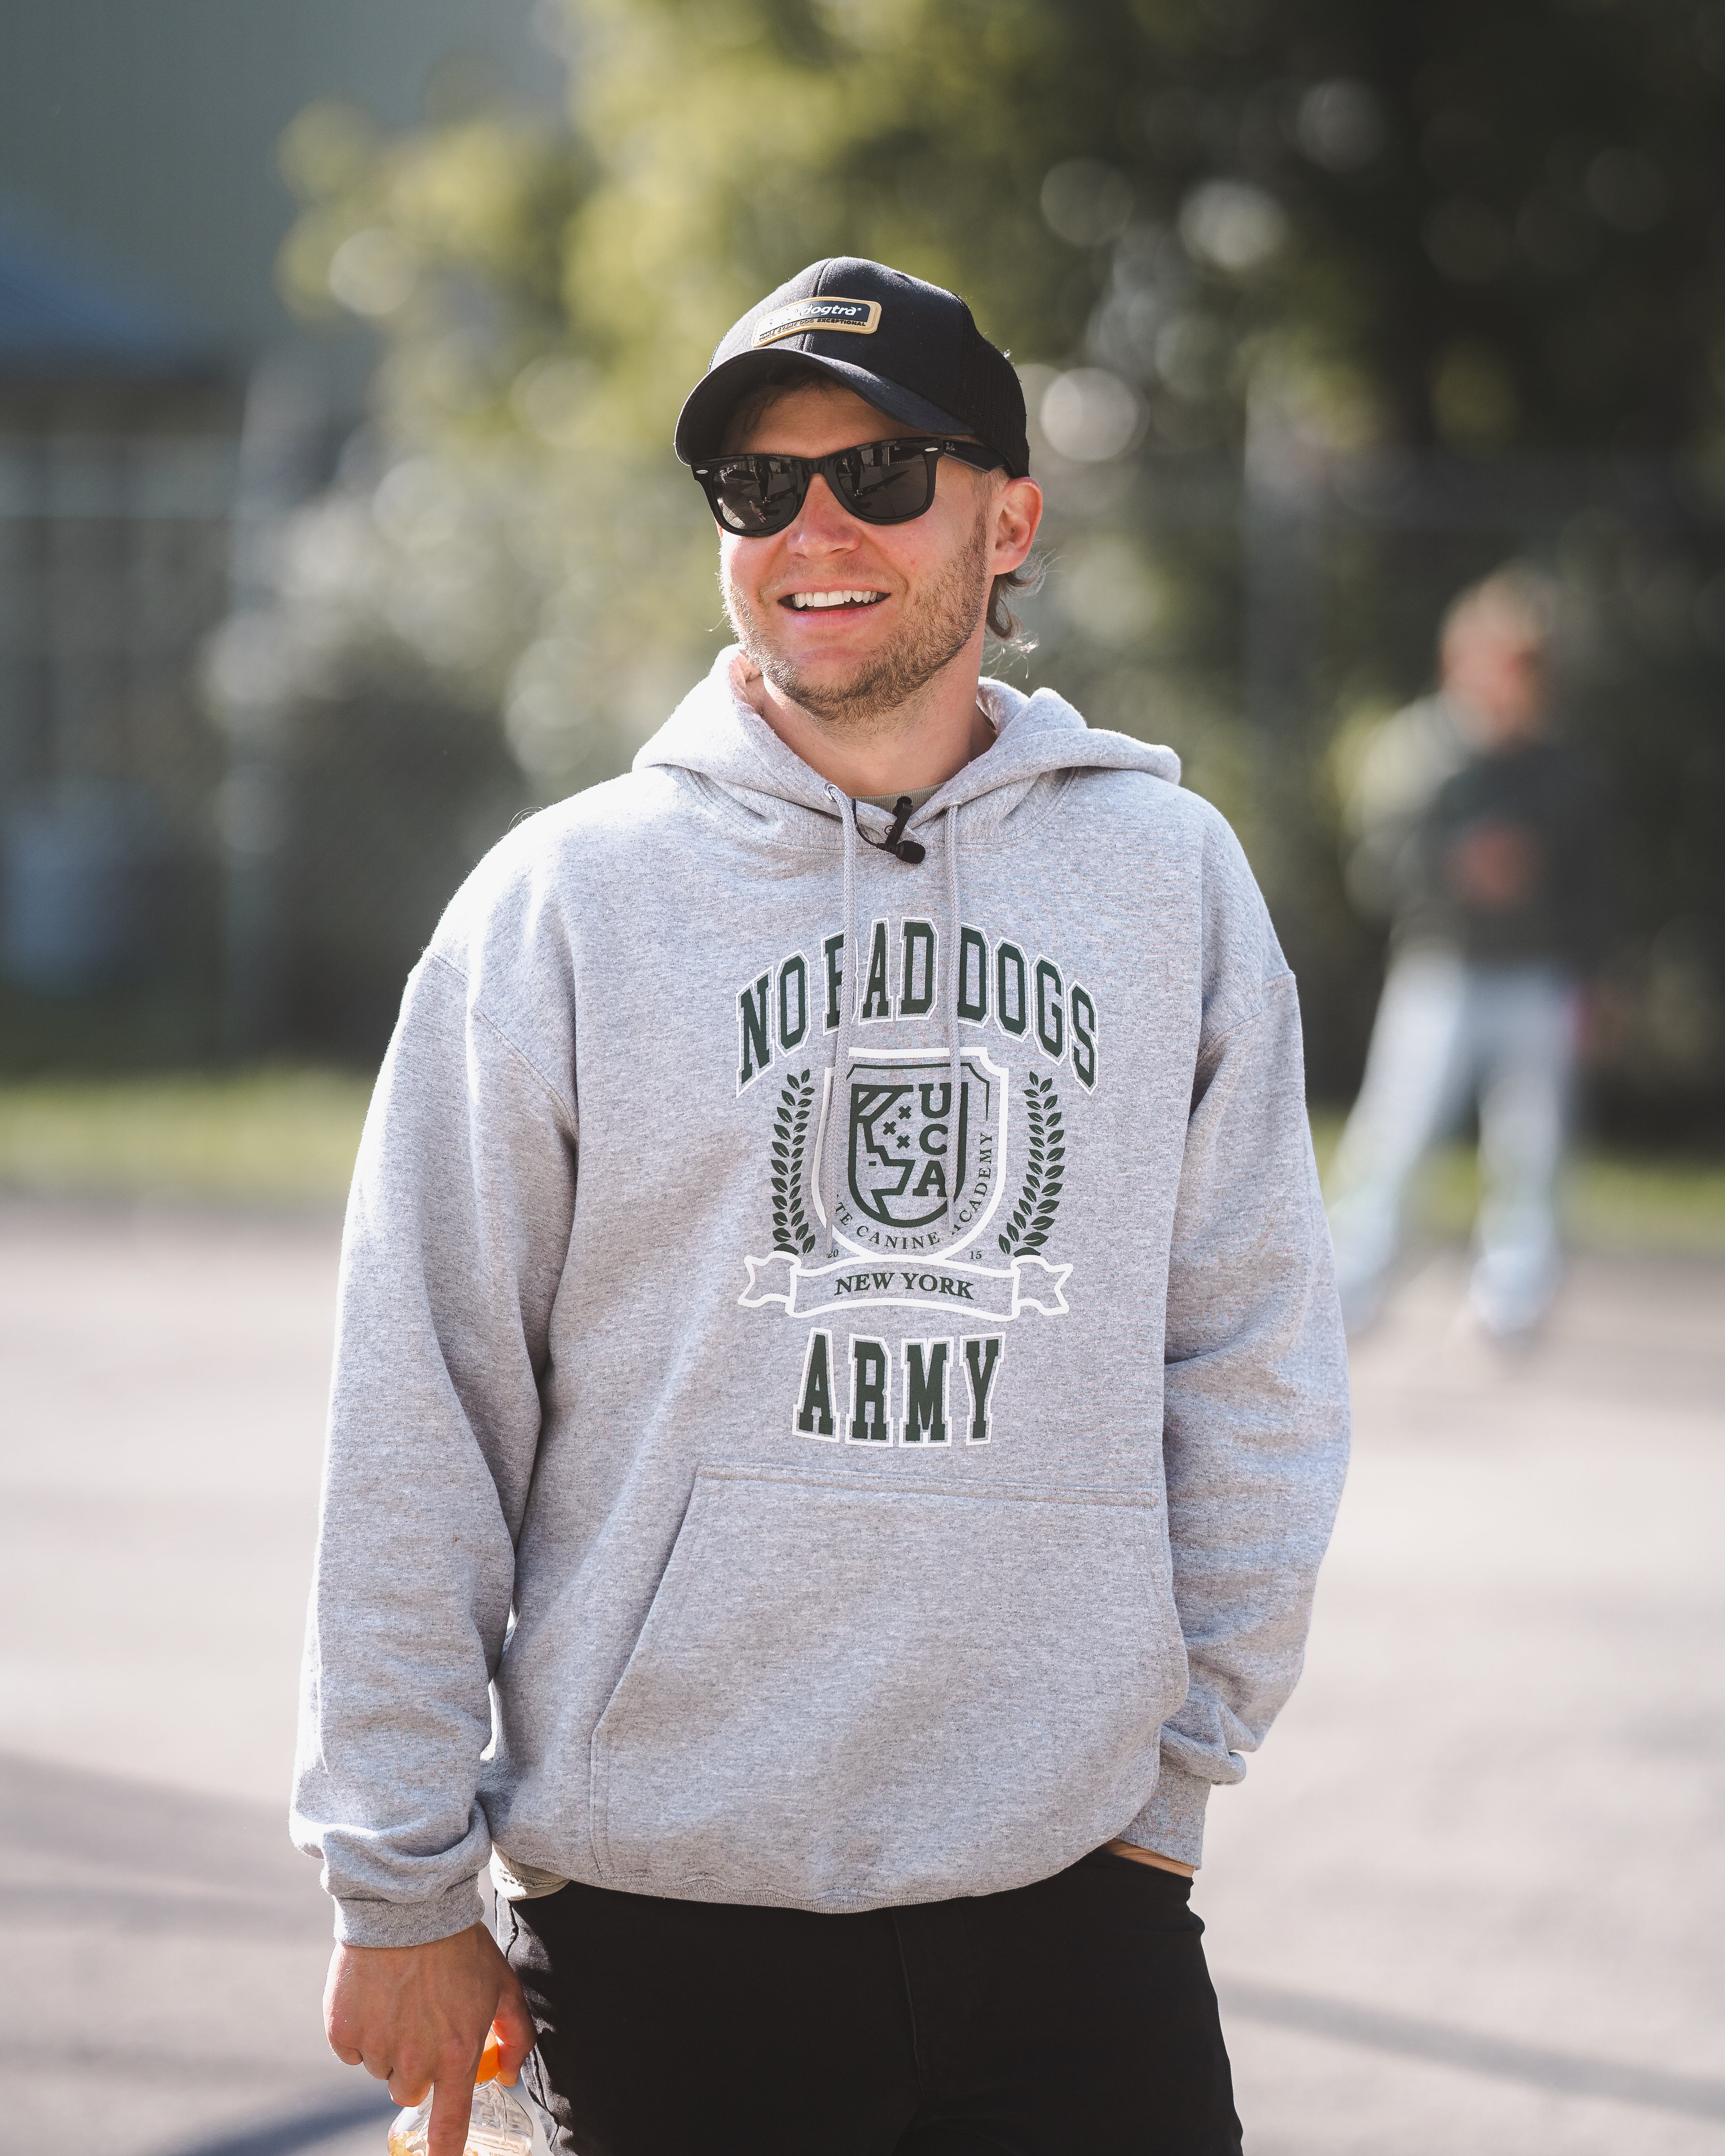 College No Bad Dogs Army Hoodie – No Bad Dogs